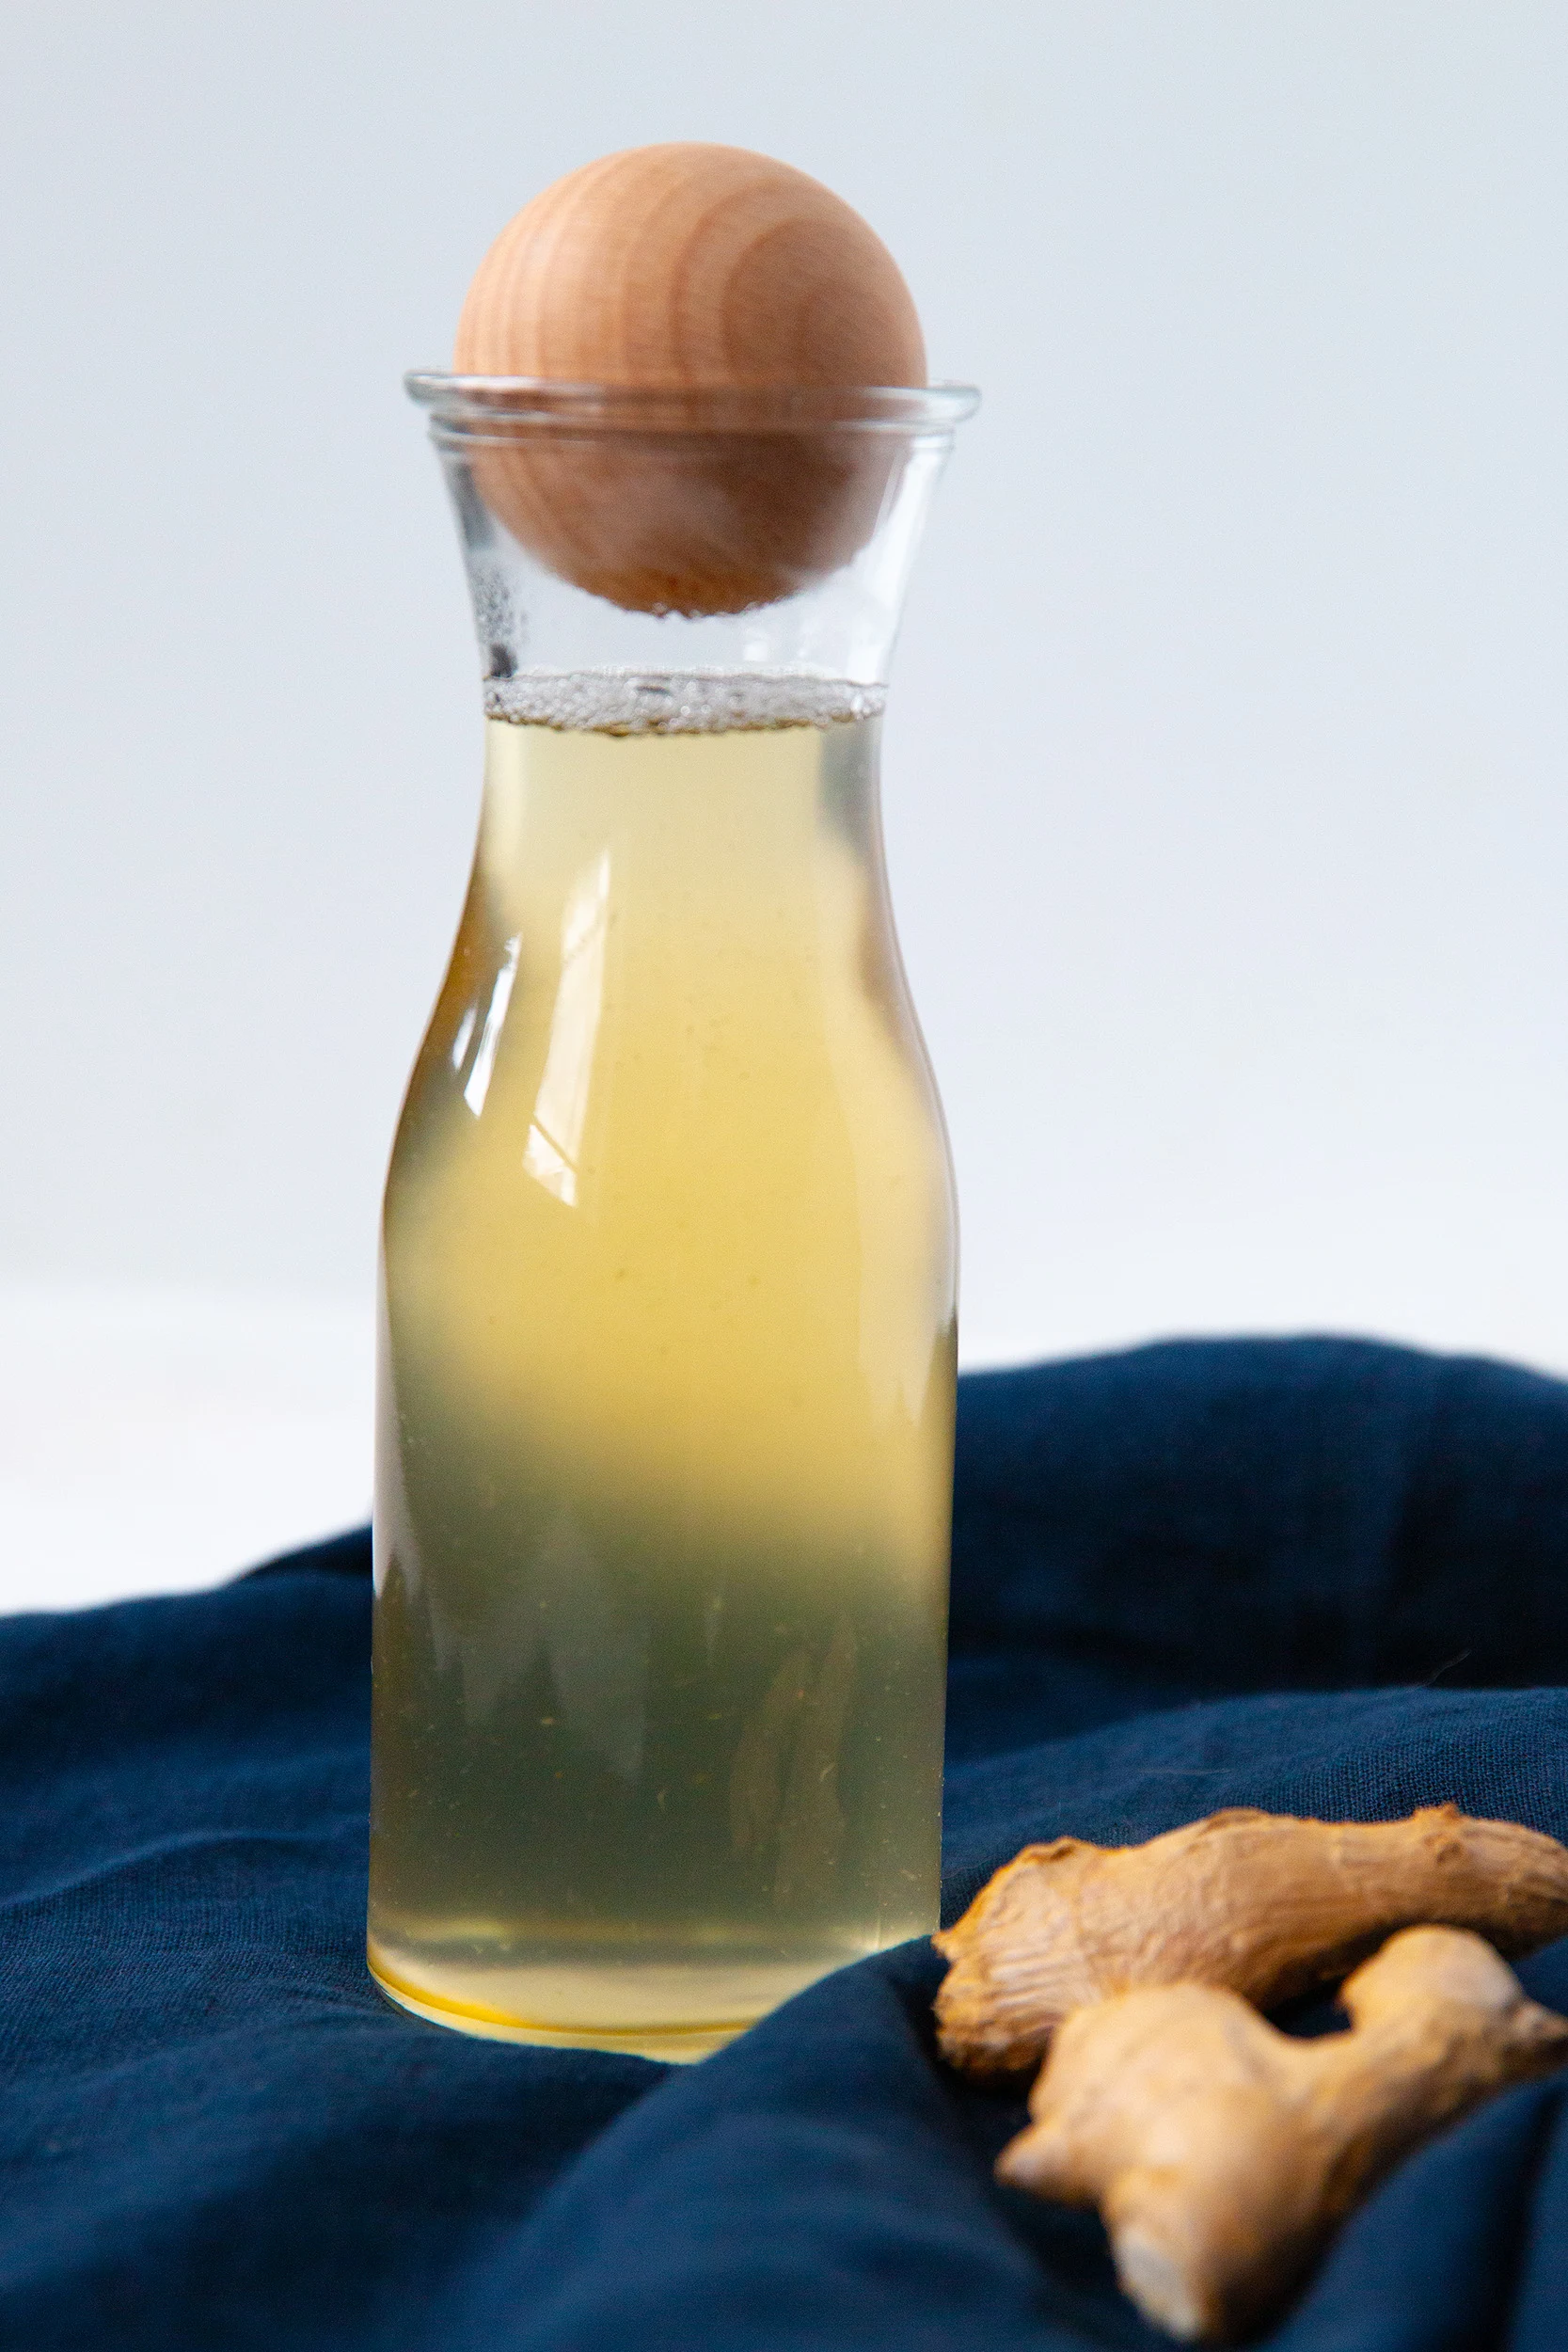 ginger syrup in a tall glass bottle with a round wood stopper. the bottles is on a dark blue towel, with fresh ginger next to it